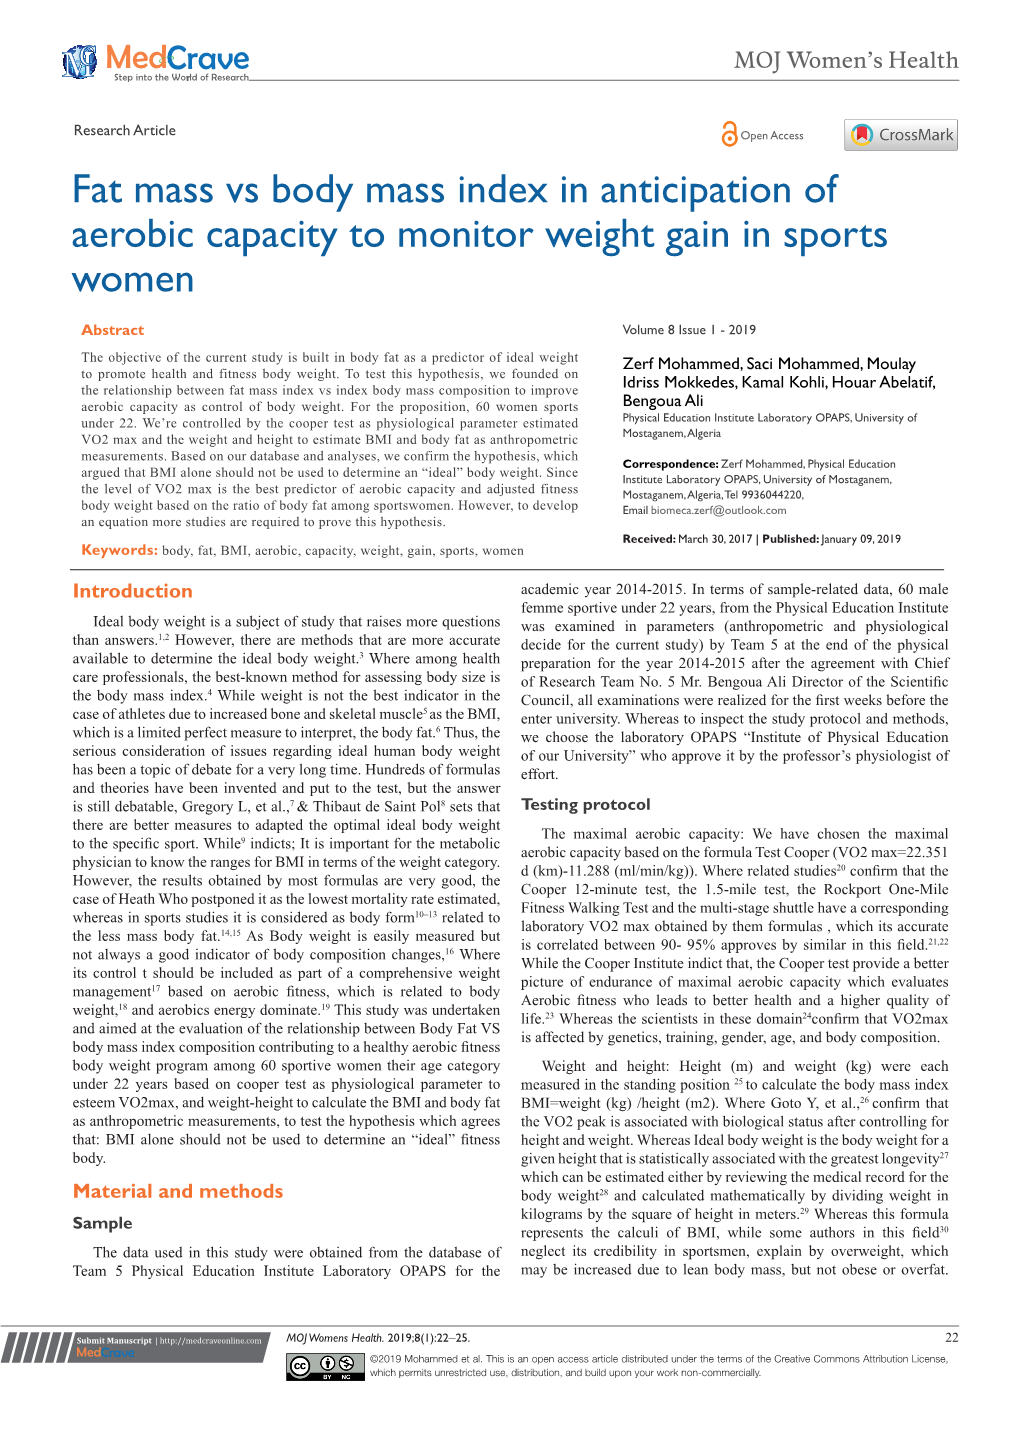 Fat Mass Vs Body Mass Index in Anticipation of Aerobic Capacity to Monitor Weight Gain in Sports Women